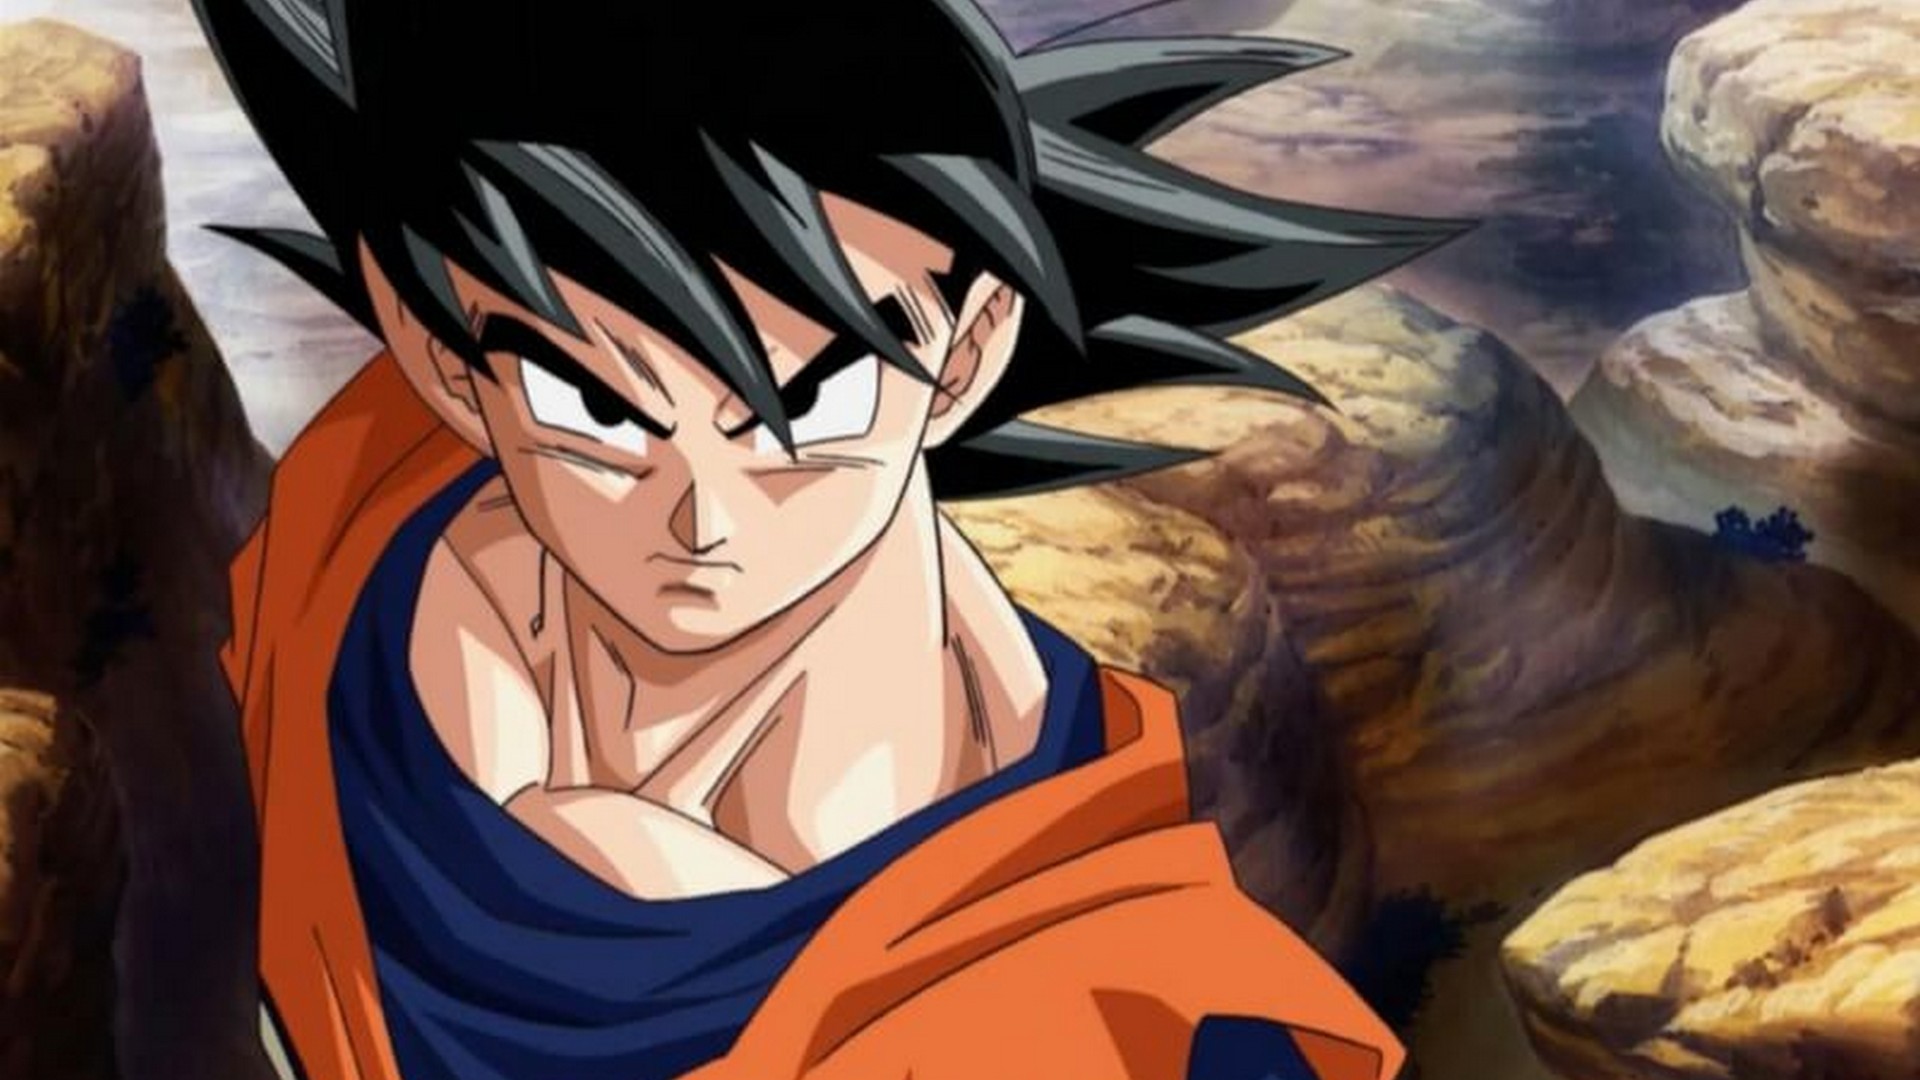 Wallpaper HD Goku Imagenes with image resolution 1920x1080 pixel. You can make this wallpaper for your Desktop Computer Backgrounds, Mac Wallpapers, Android Lock screen or iPhone Screensavers